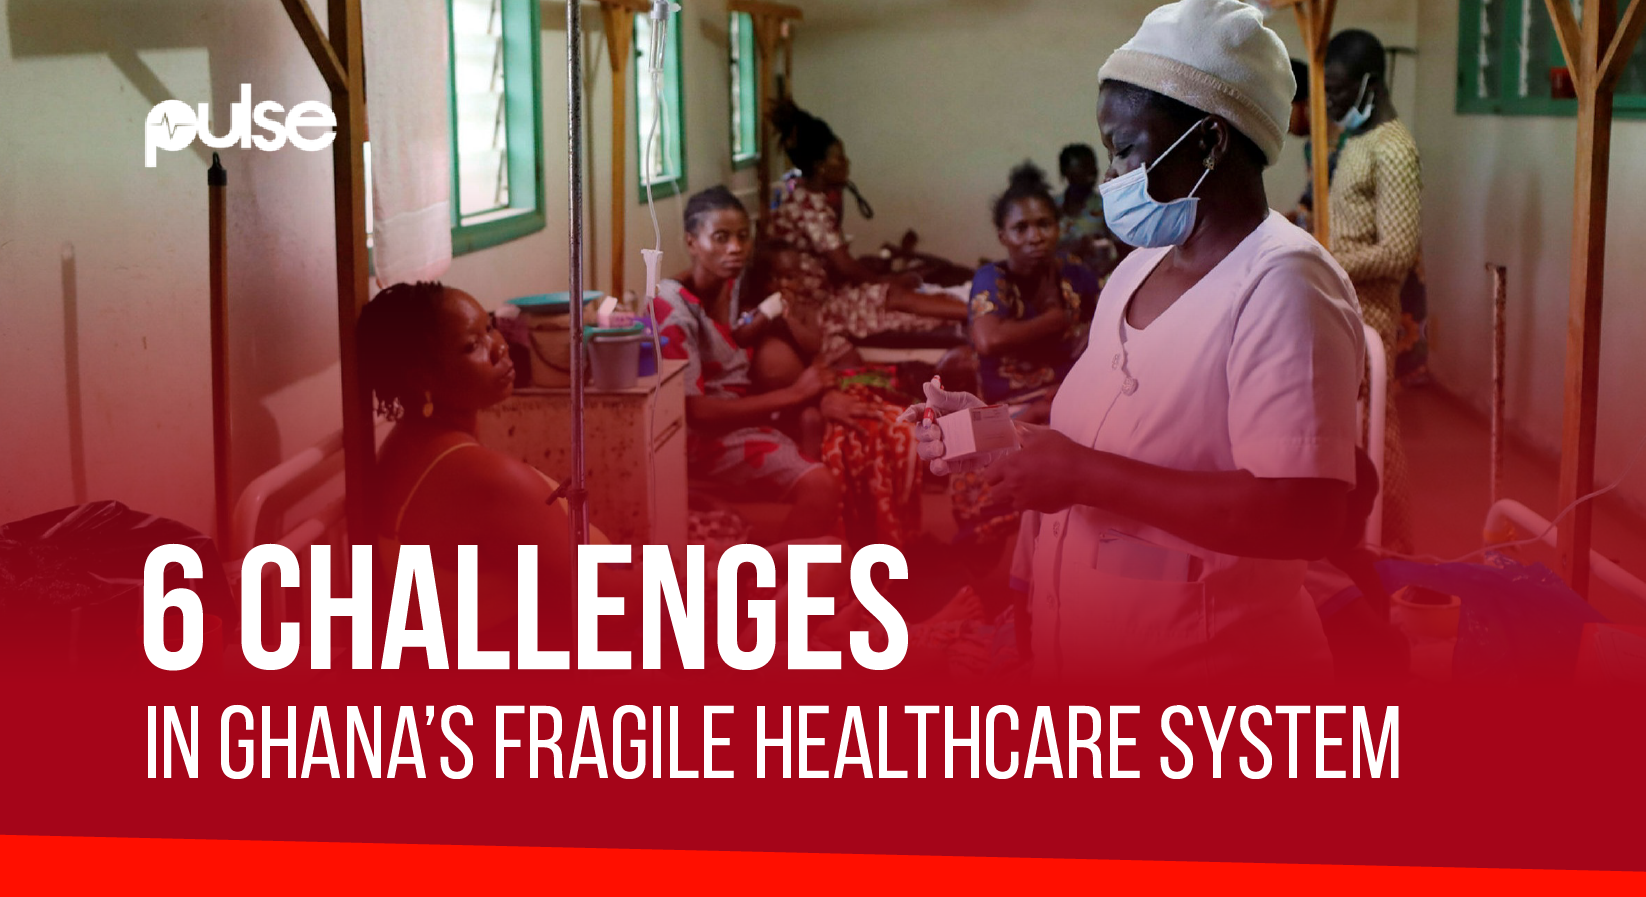 Ineffective health insurance system is one of the key challenges hurting Ghana's healthcare system.